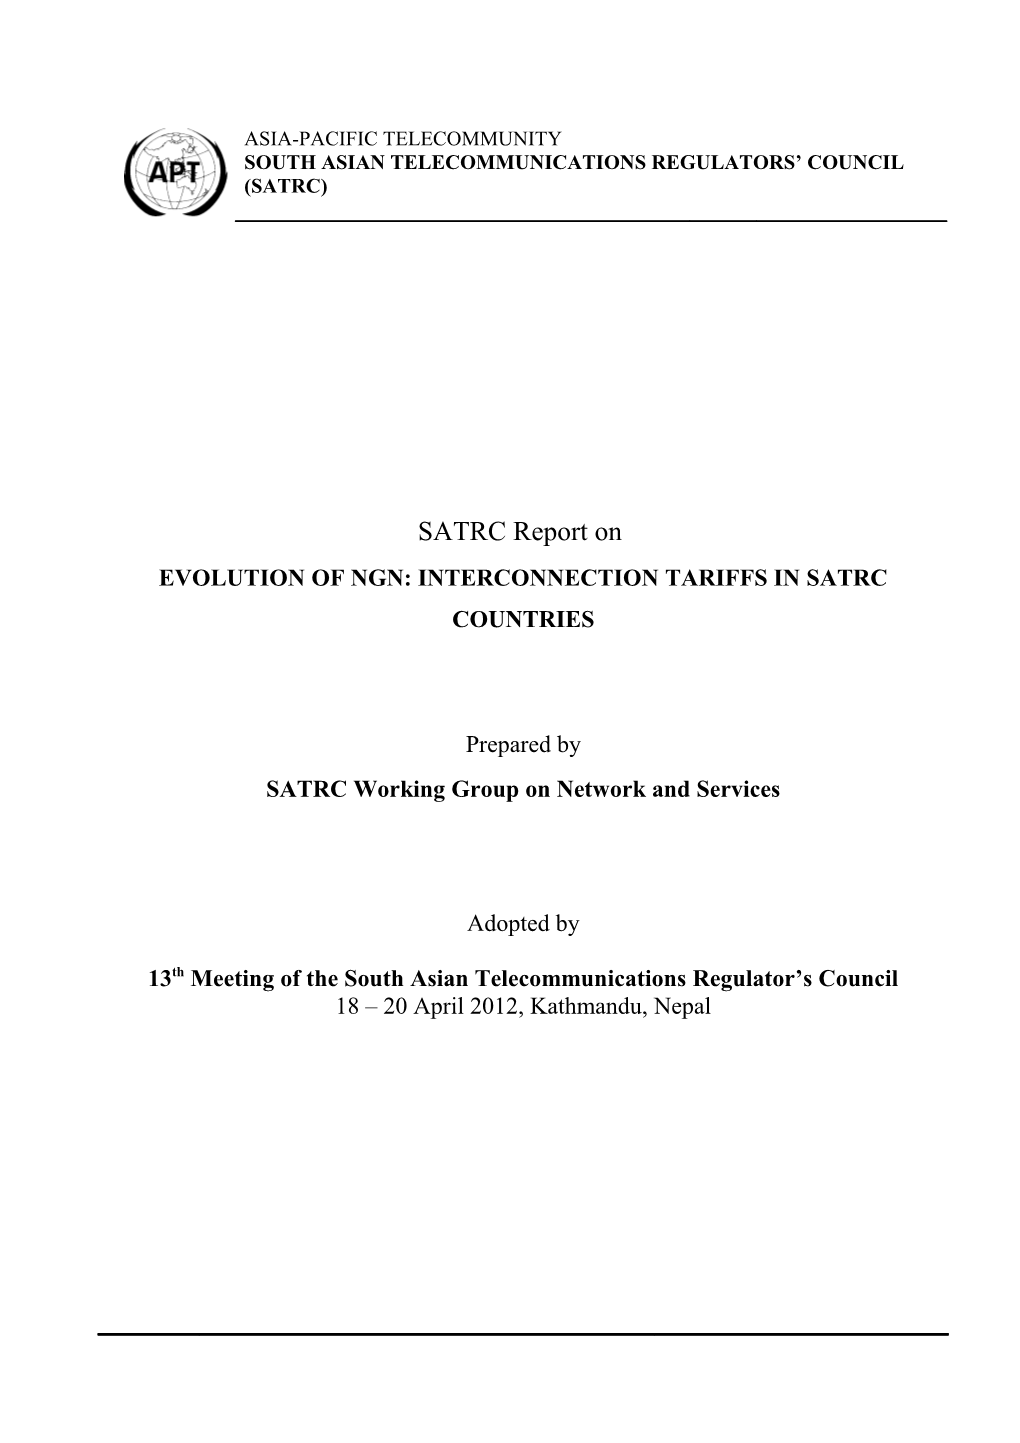 Evolution of Ngn: Interconnection Tariffs in Satrc Countries